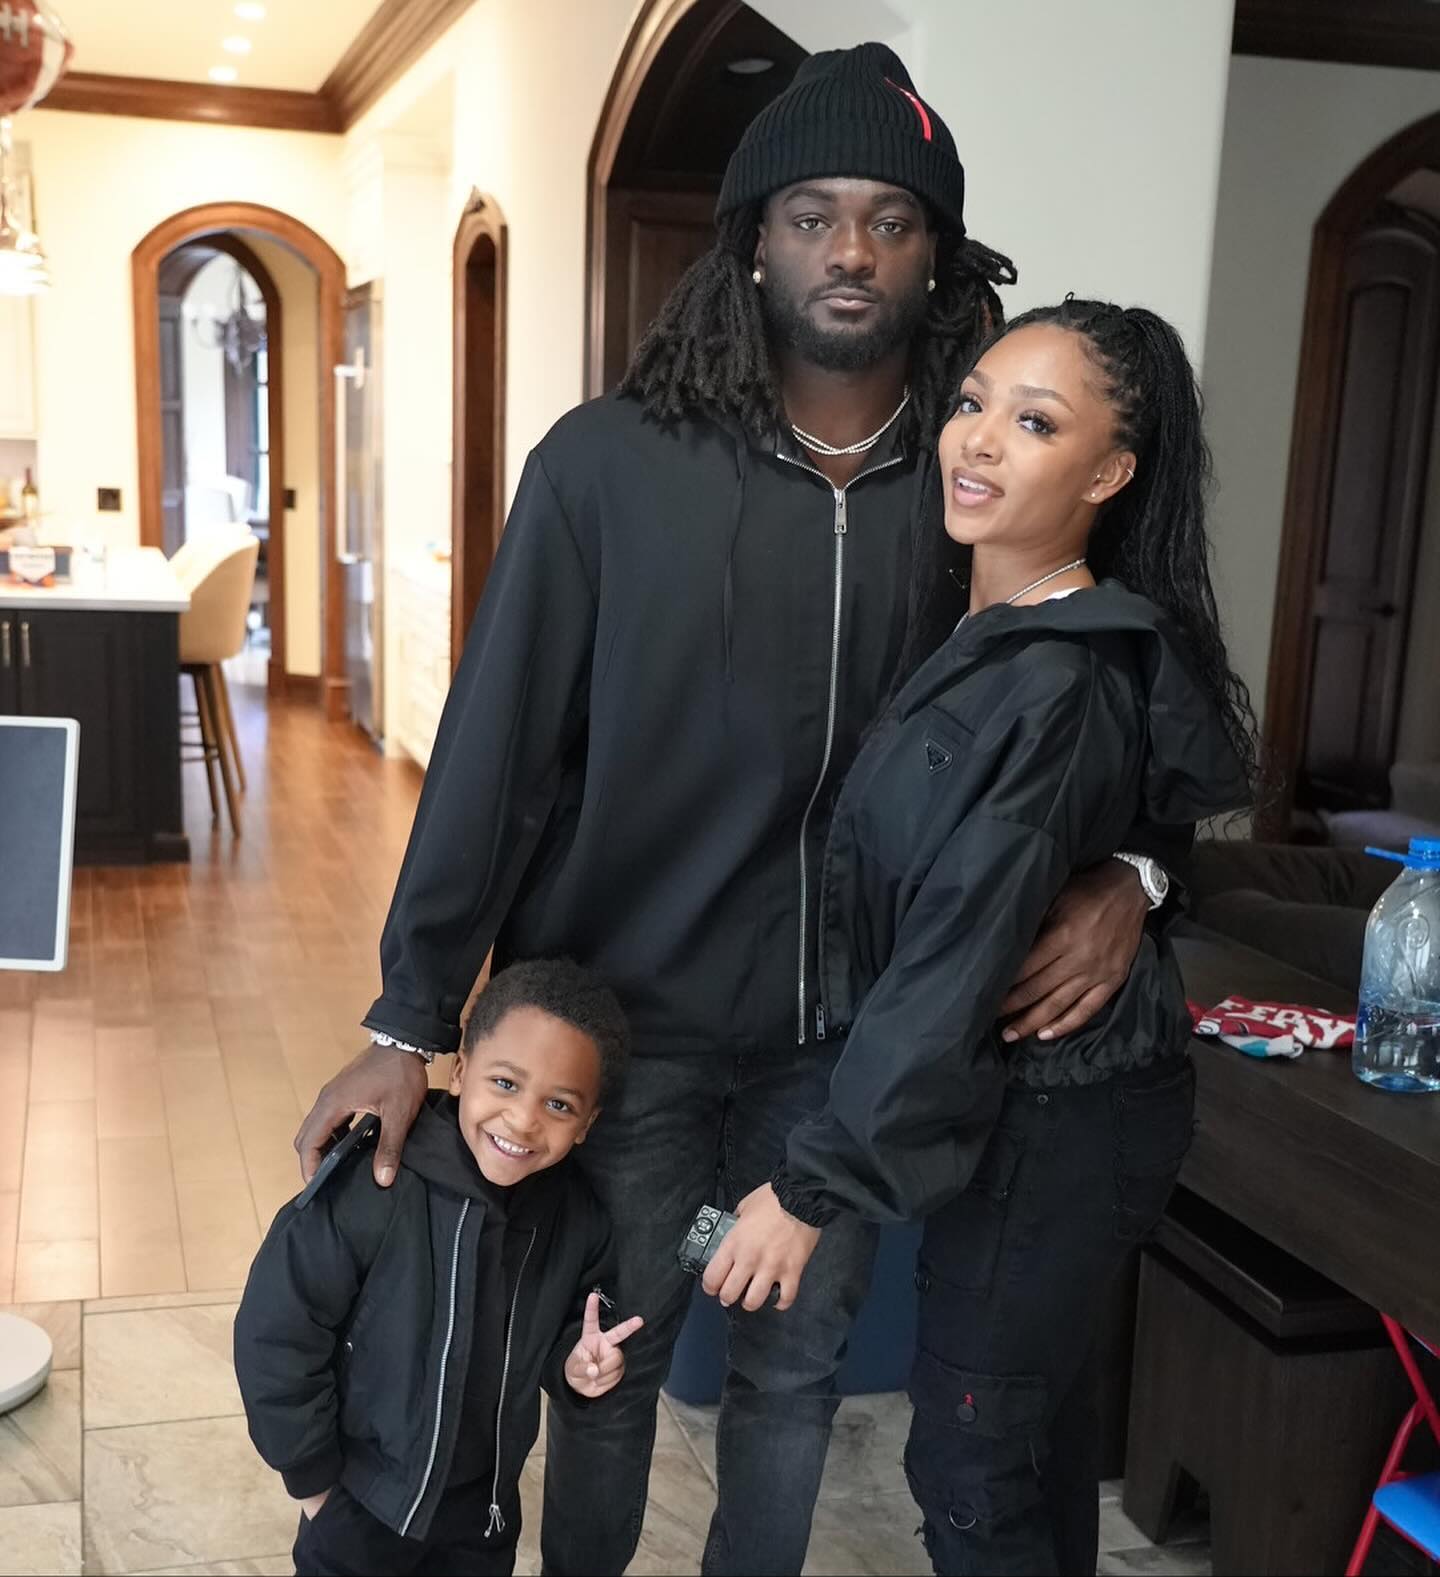 Rochelle posts family clips on Instagram and TikTok, while also giving insider info about behind-the-scenes NFL life